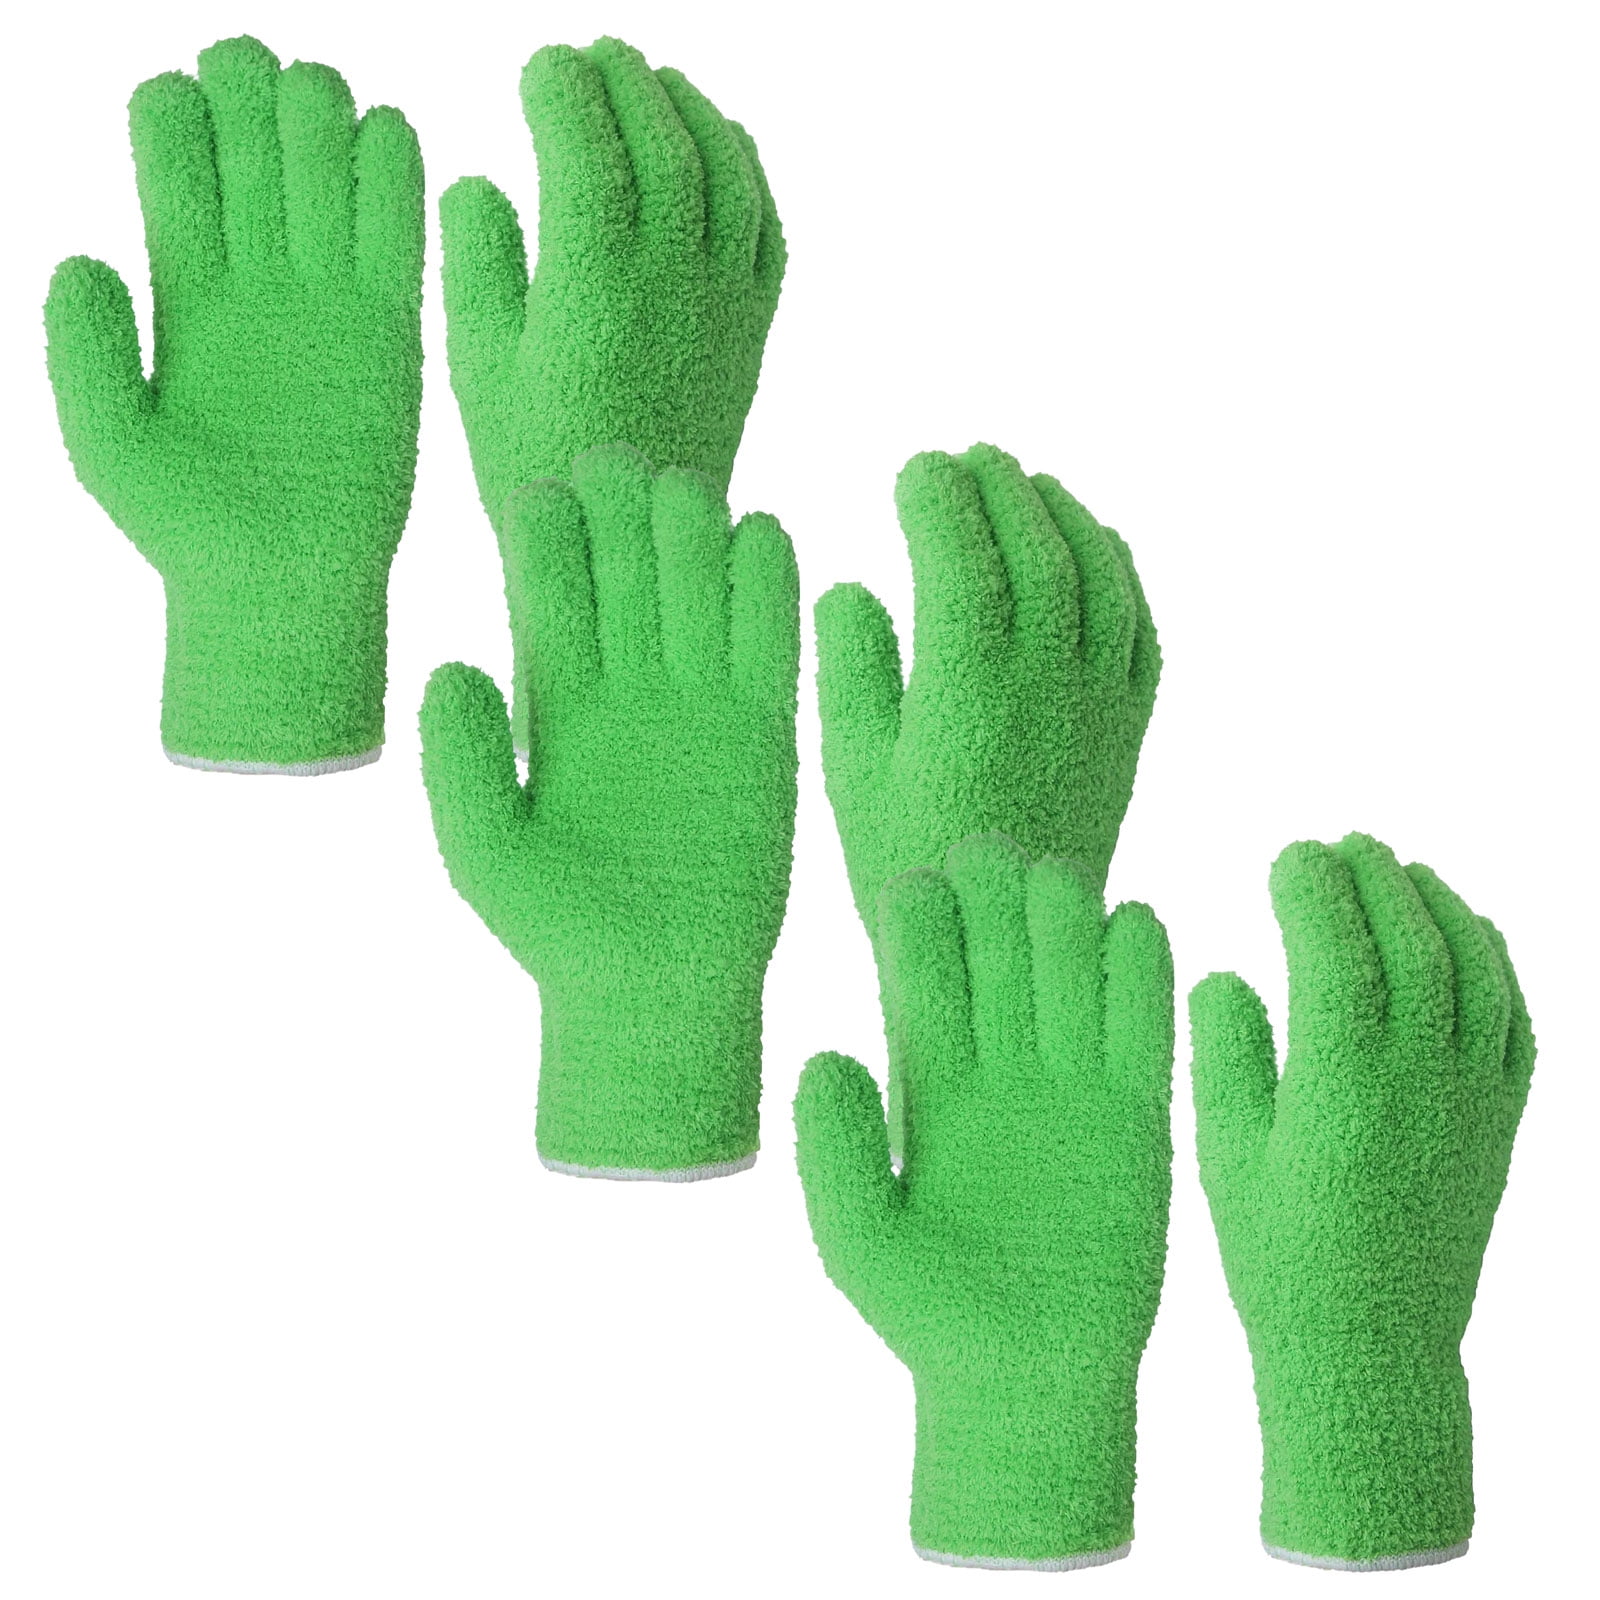 Evridwear Microfiber Dusting Gloves, Dusting Cleaning Glove for Plants,  Blinds, Lamps and Small Hard to Reach Corners, 2 Pairs (Green X/XL)